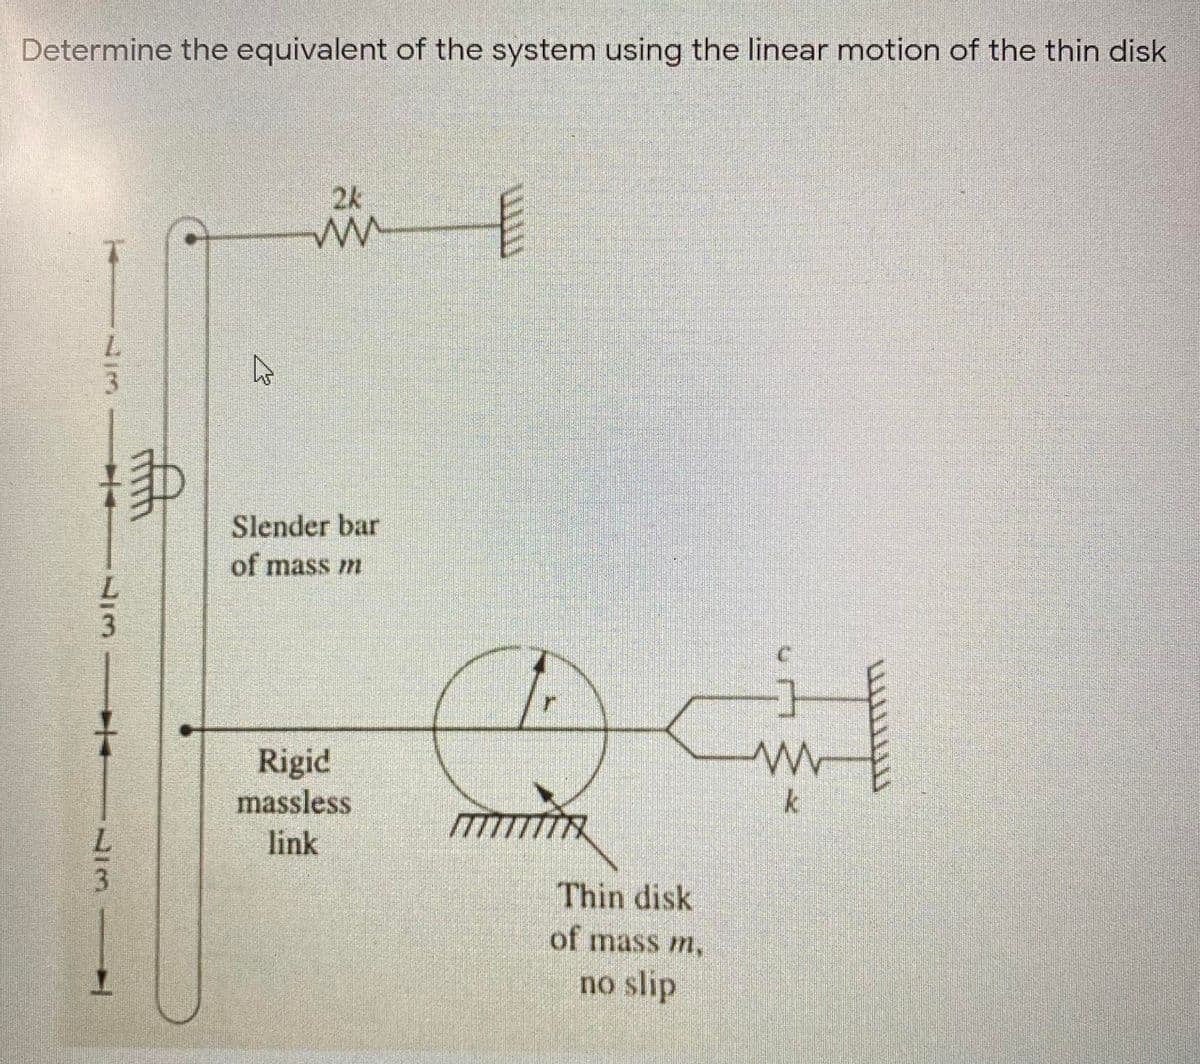 Determine the equivalent of the system using the linear motion of the thin disk
2k
Slender bar
of mass m
Rigid
massless
link
k
Thin disk
of mass m,
no slip
चाल
